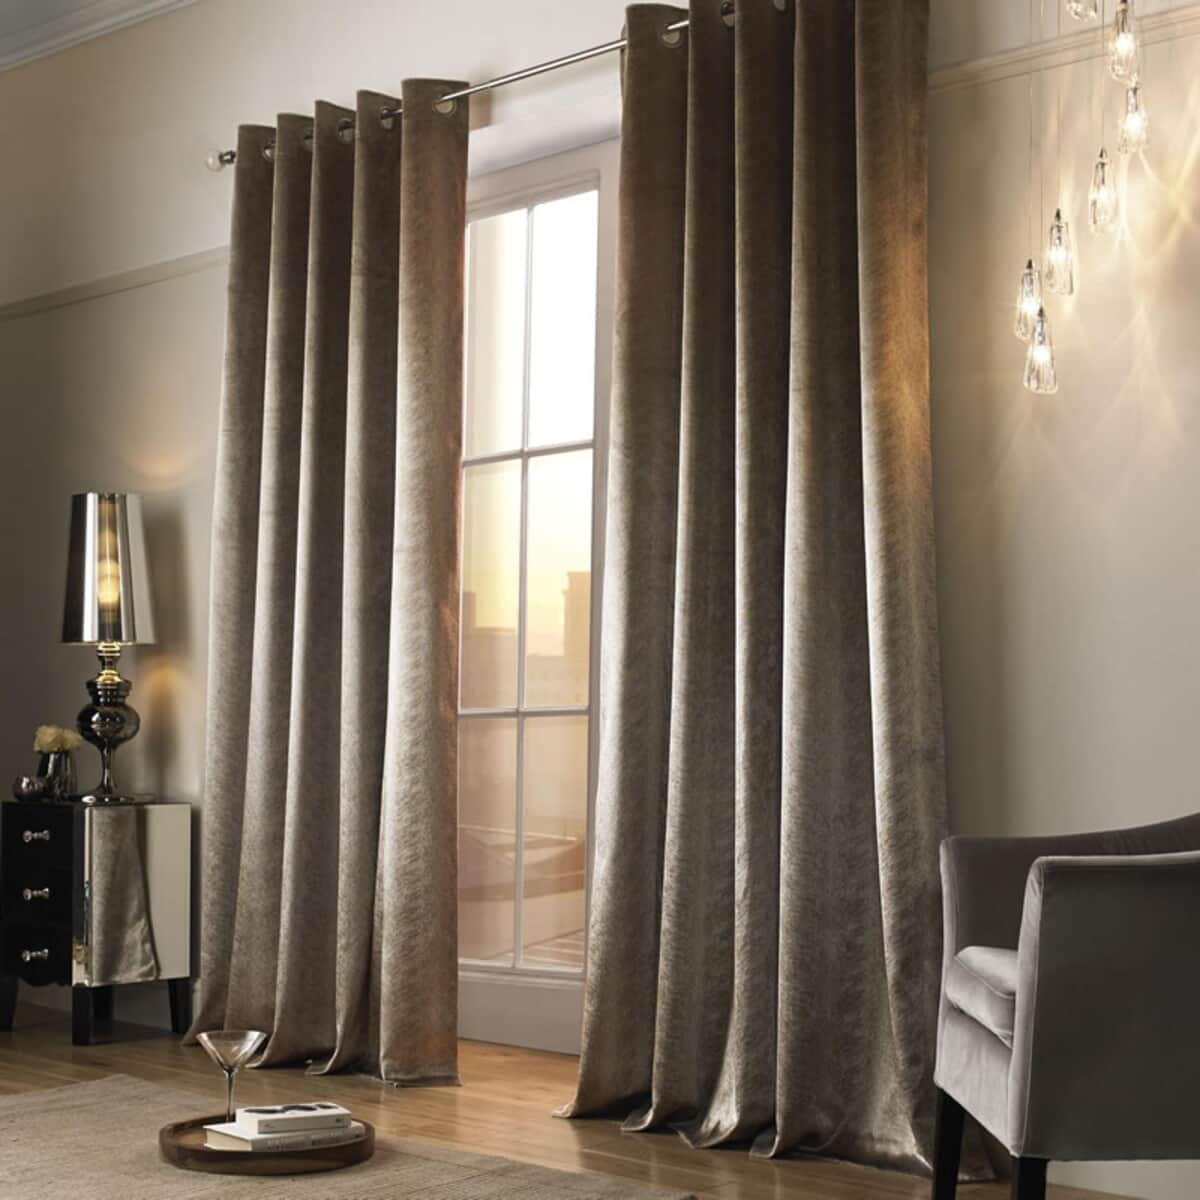 Kylie at Home Adelphi Caramel Curtains large